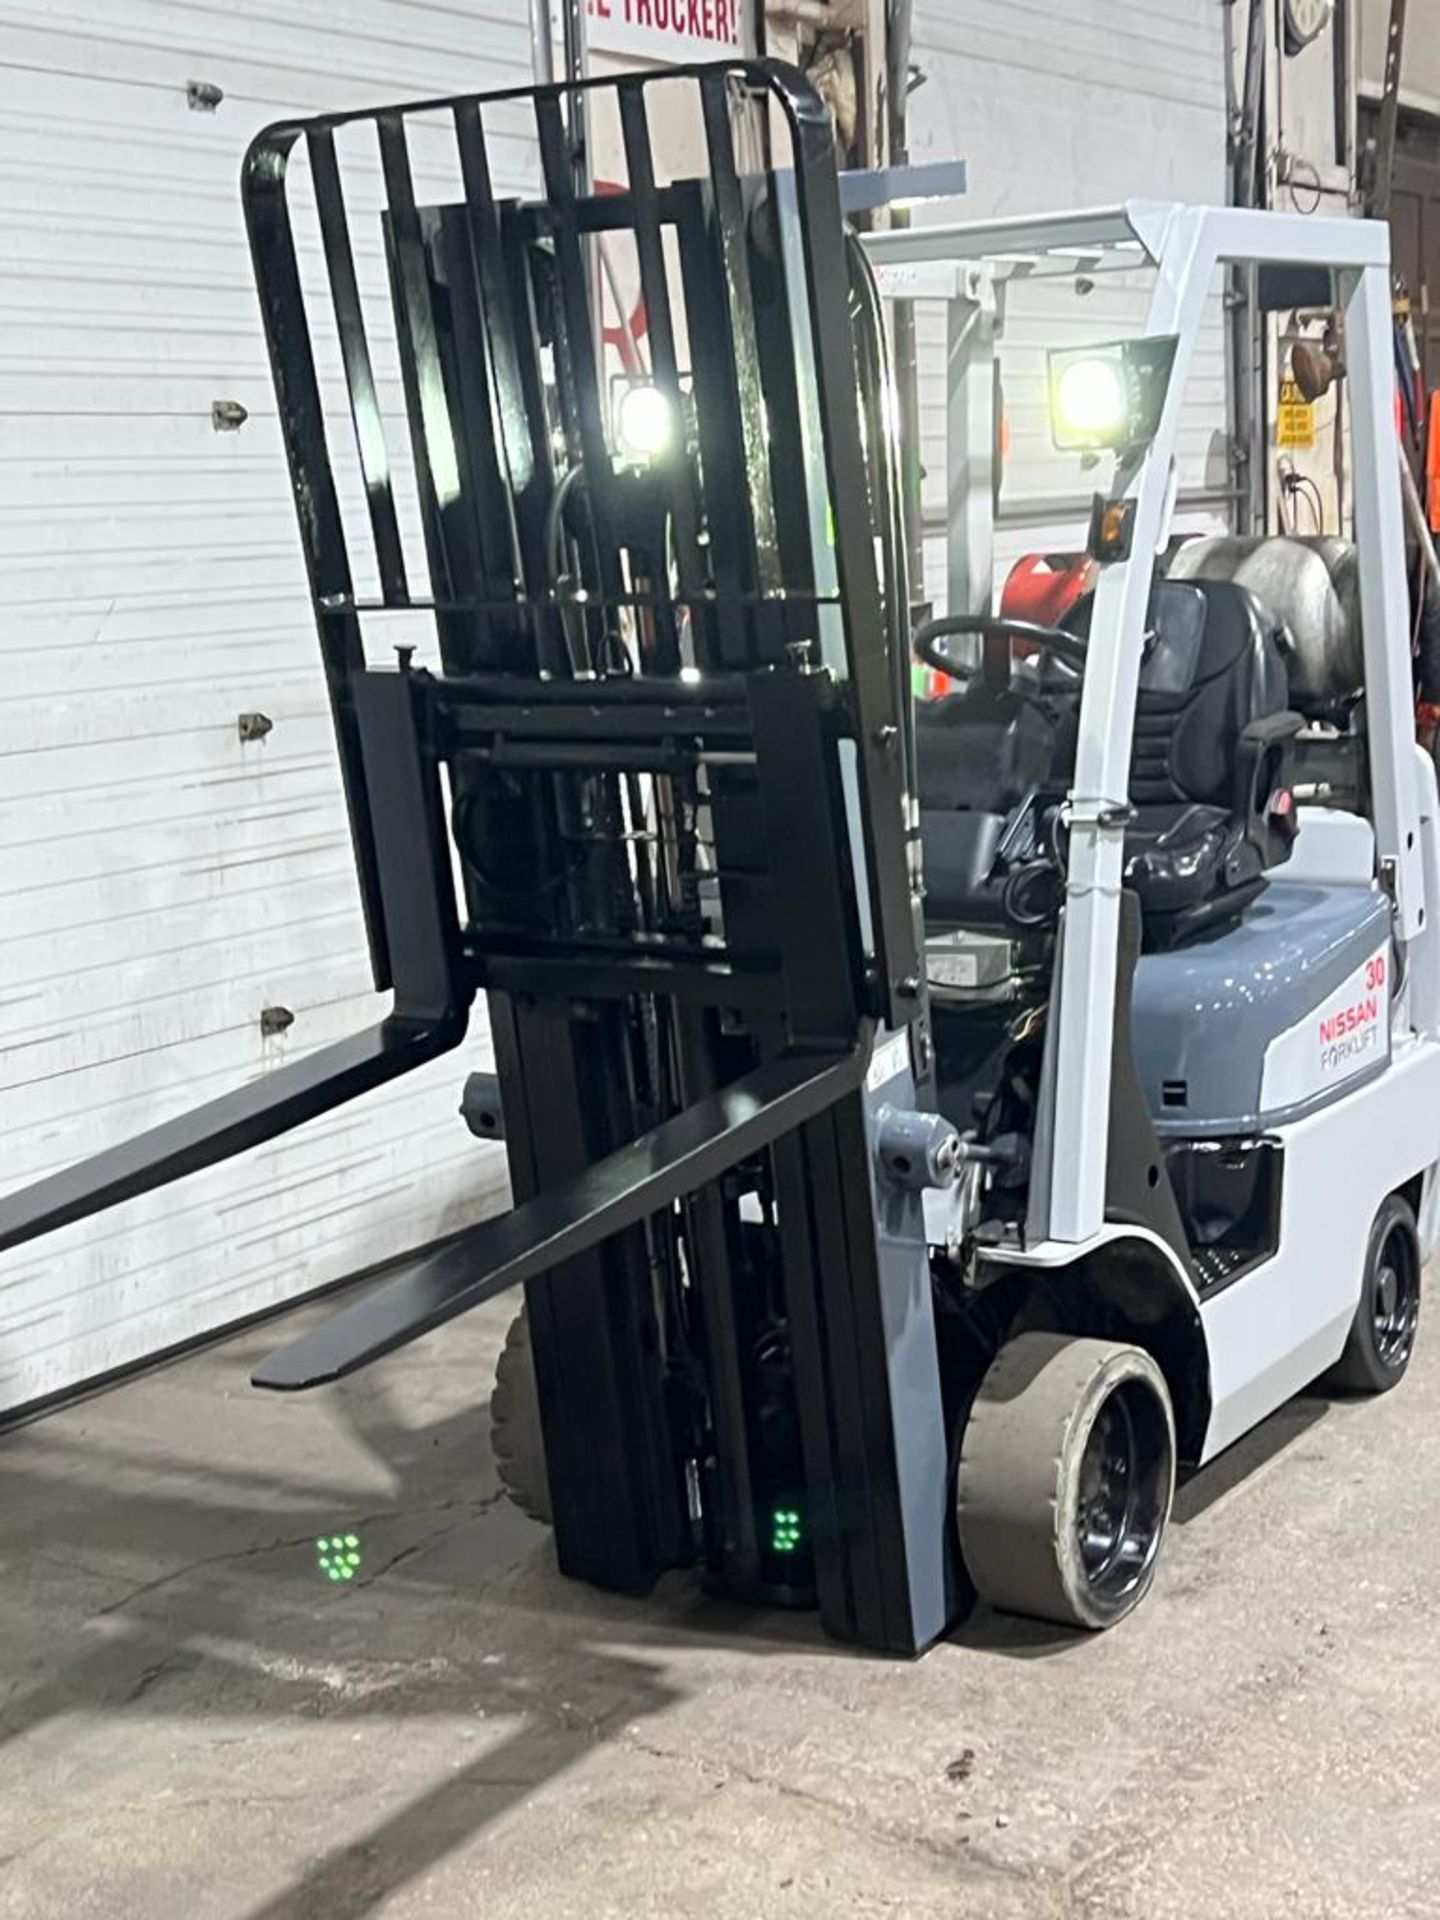 Nissan 3,000lbs Capacity Forklift LPG (Propane powered) with Sideshift & 3-stage Mast (no propane - Image 2 of 3